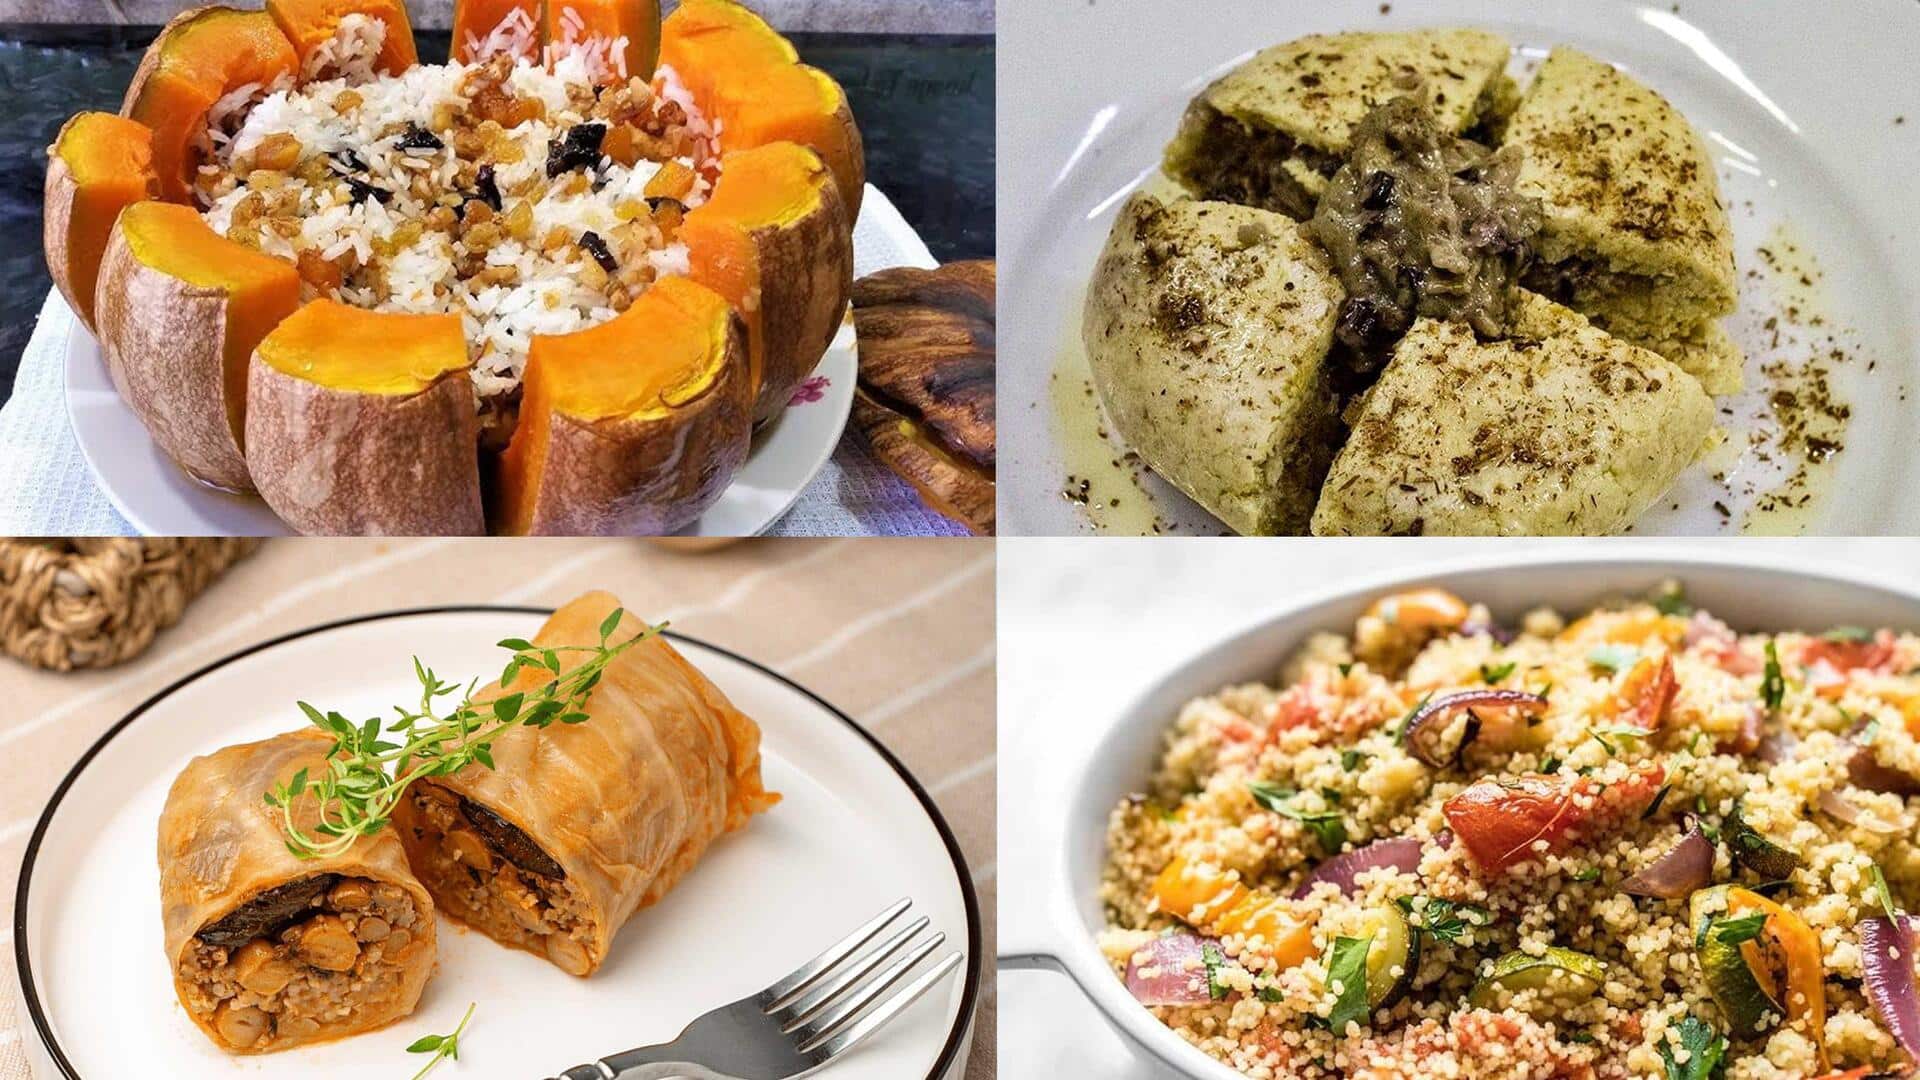 Must-try vegetarian dishes in Armenia